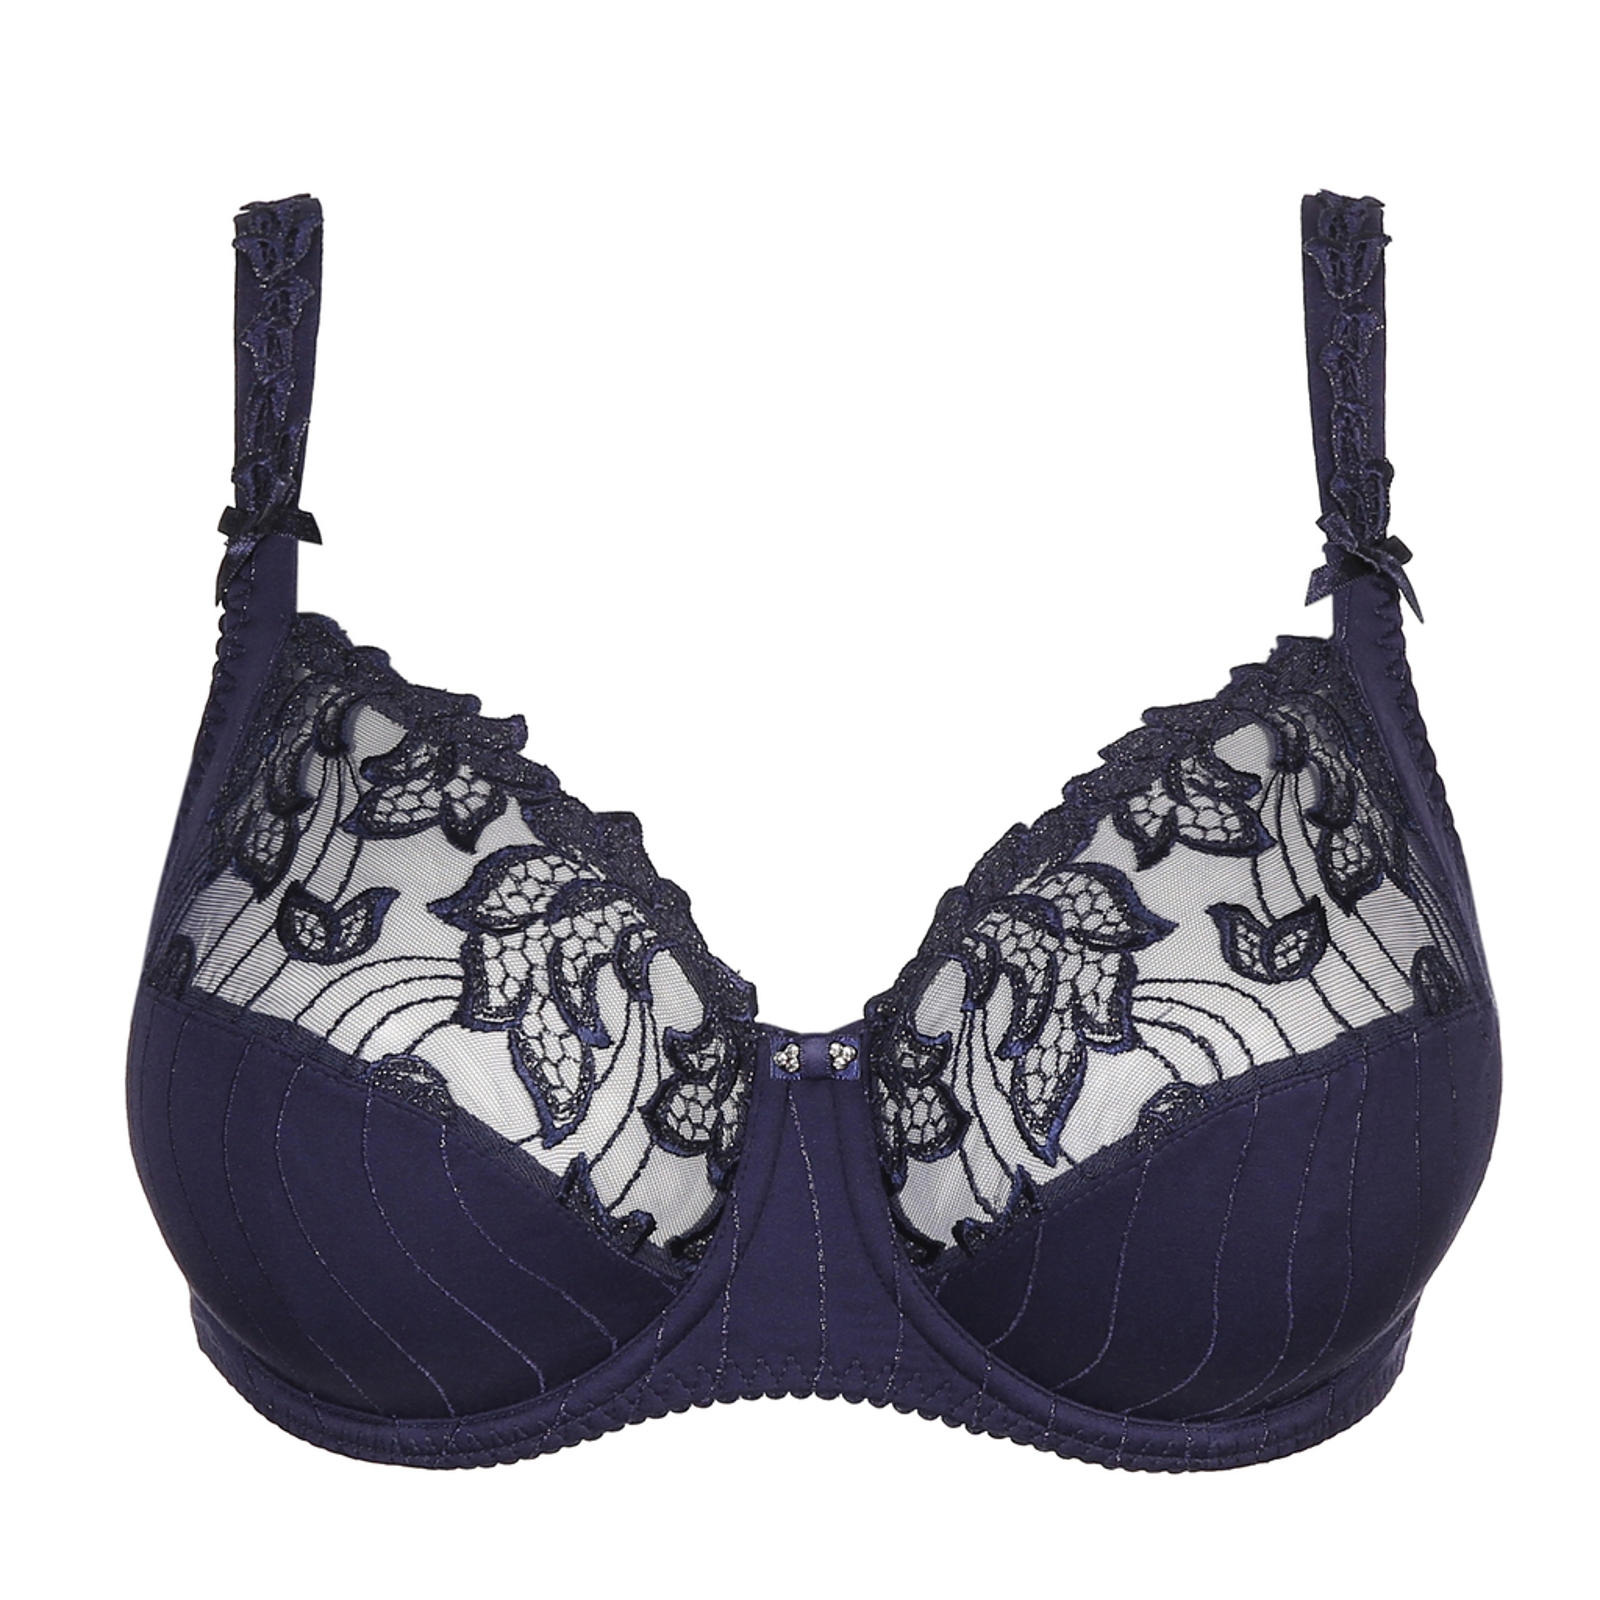 Prima Donna Deauville in Silver Blue - £86.31 - Beautiful from